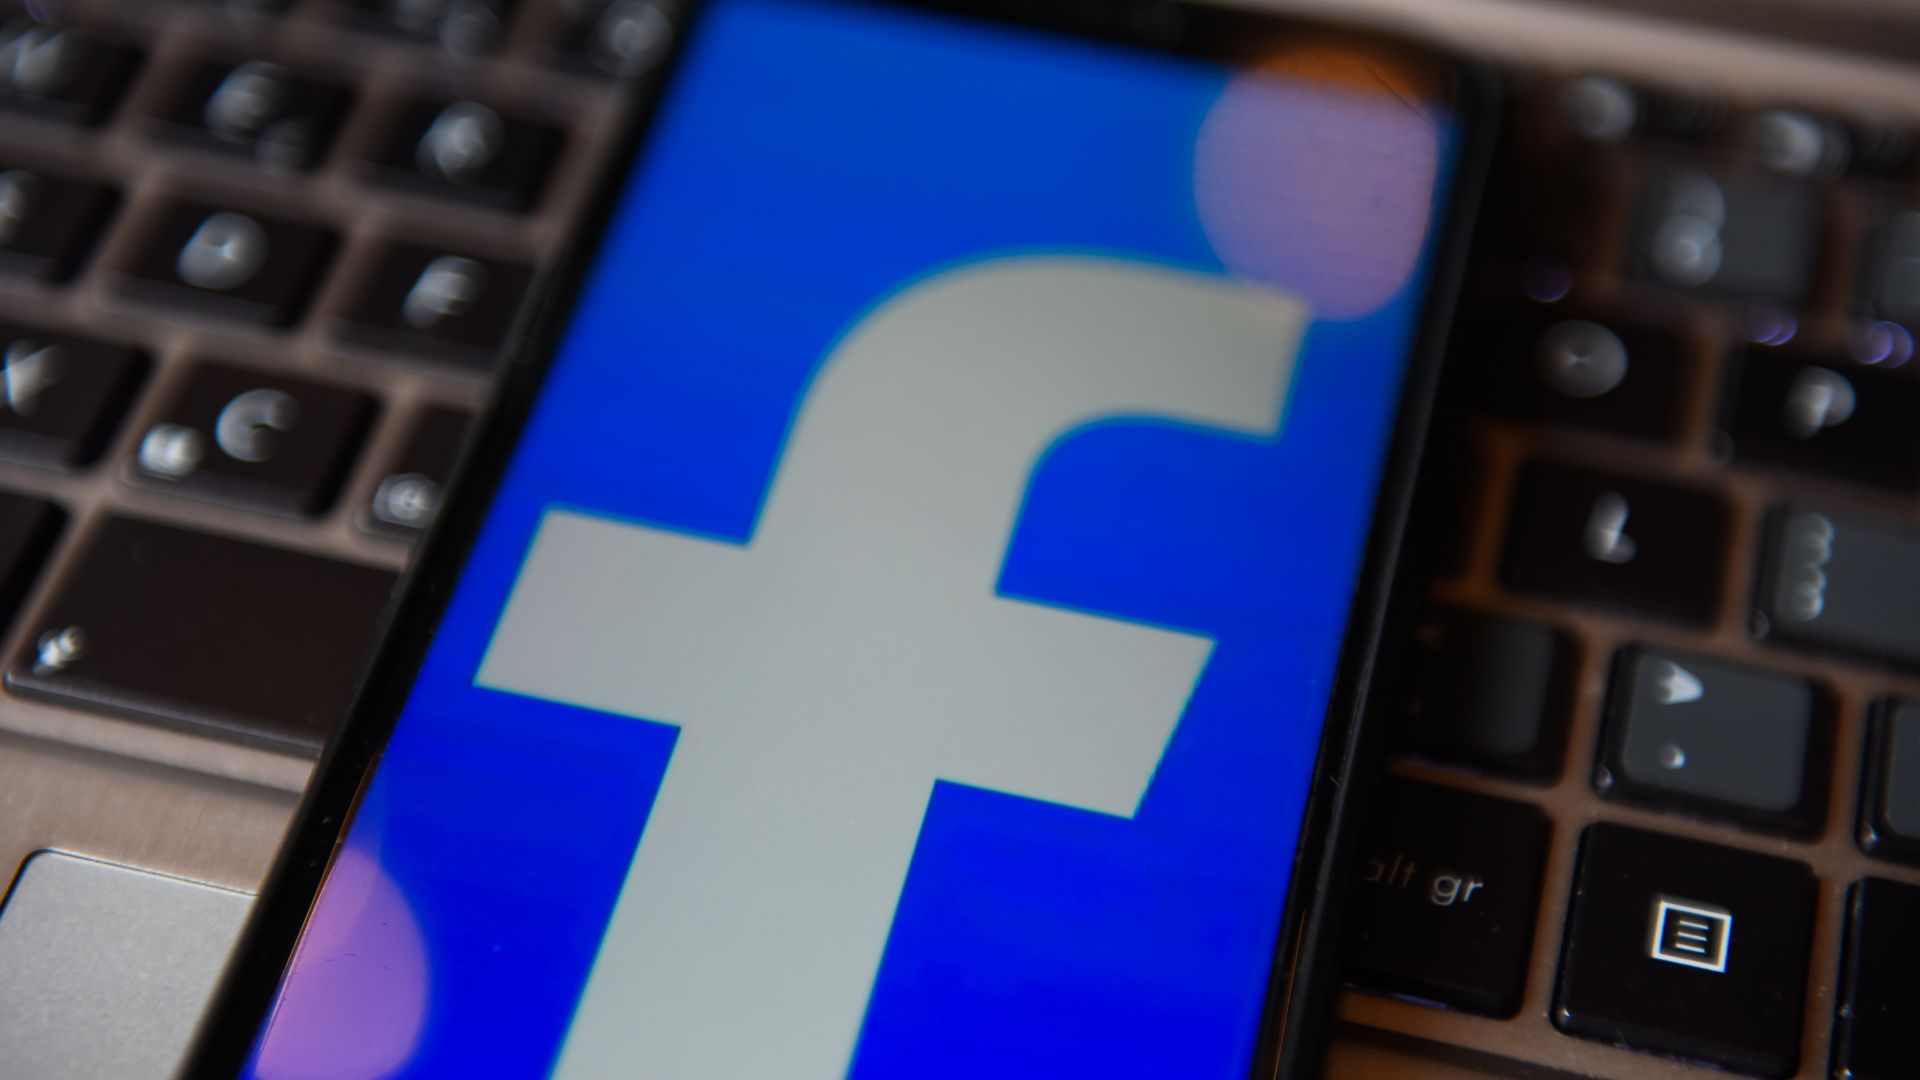 A photo of the Facebook logo displayed on a smartphone screen